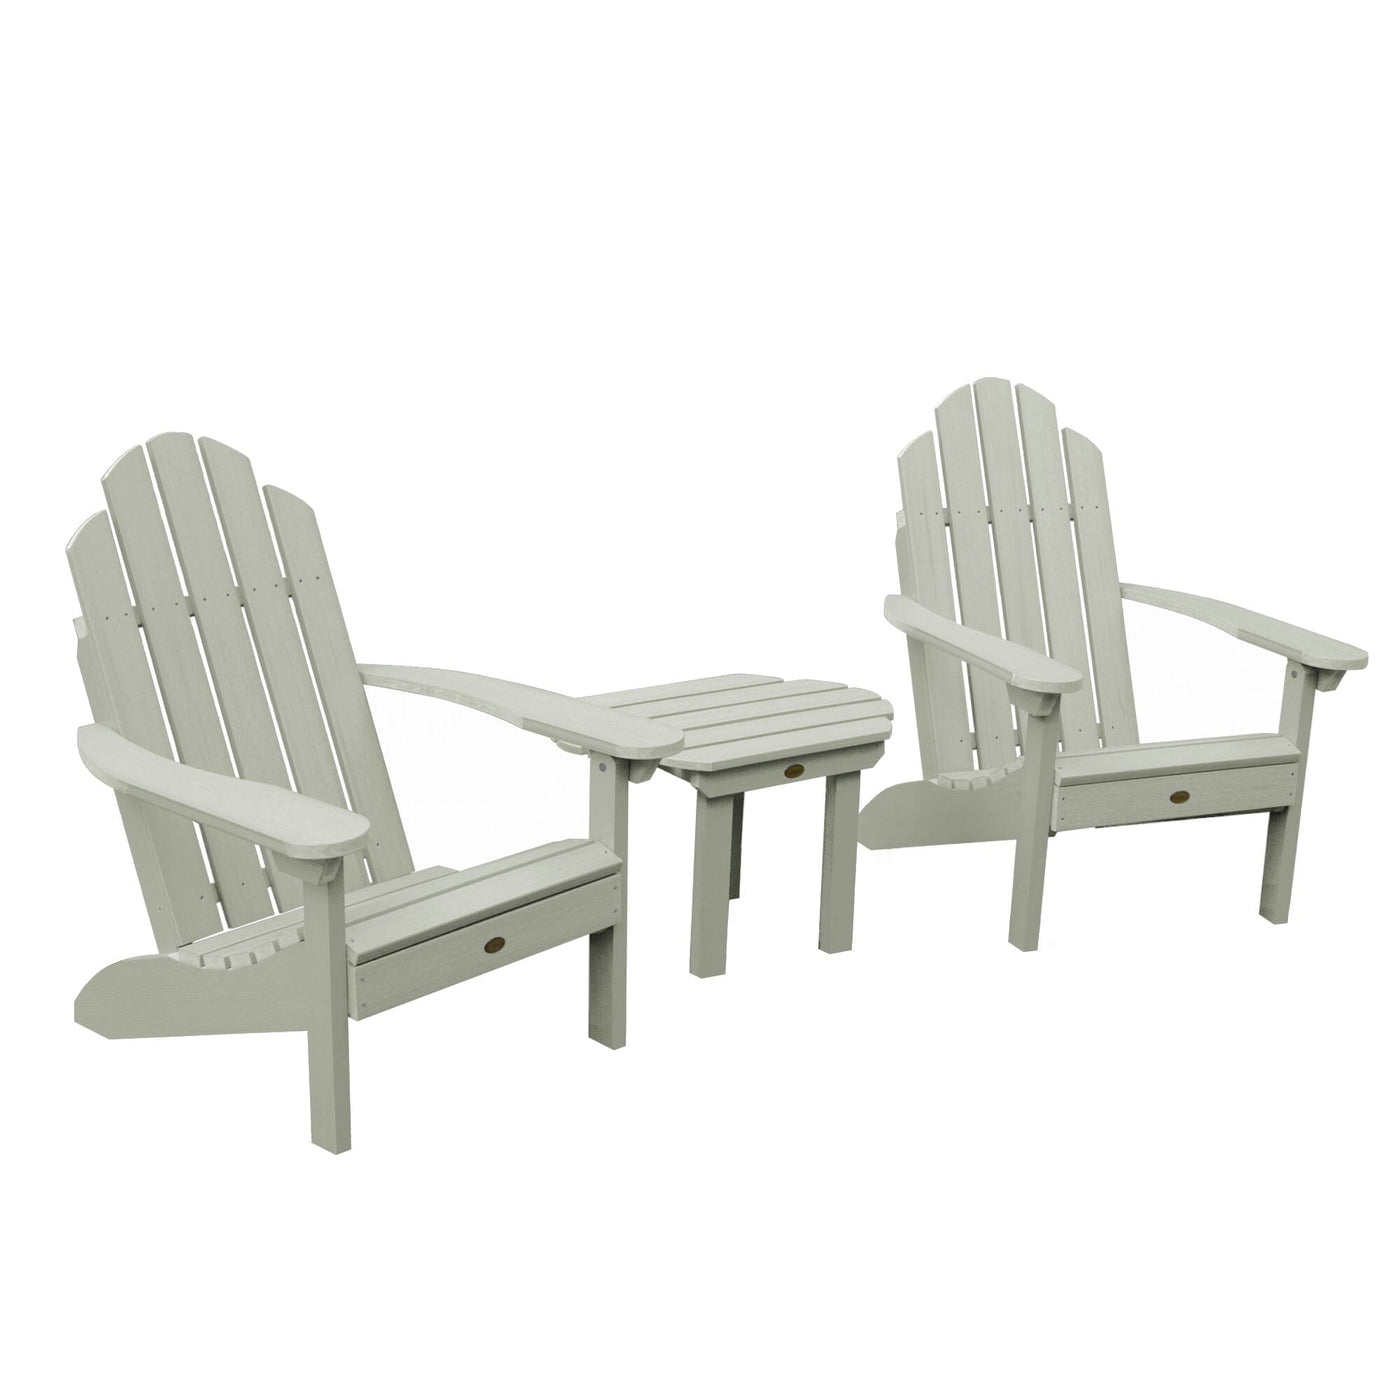 2 Classic Westport Adirondack Chairs with Westport Side Table Kitted Sets Highwood USA Eucalyptus 